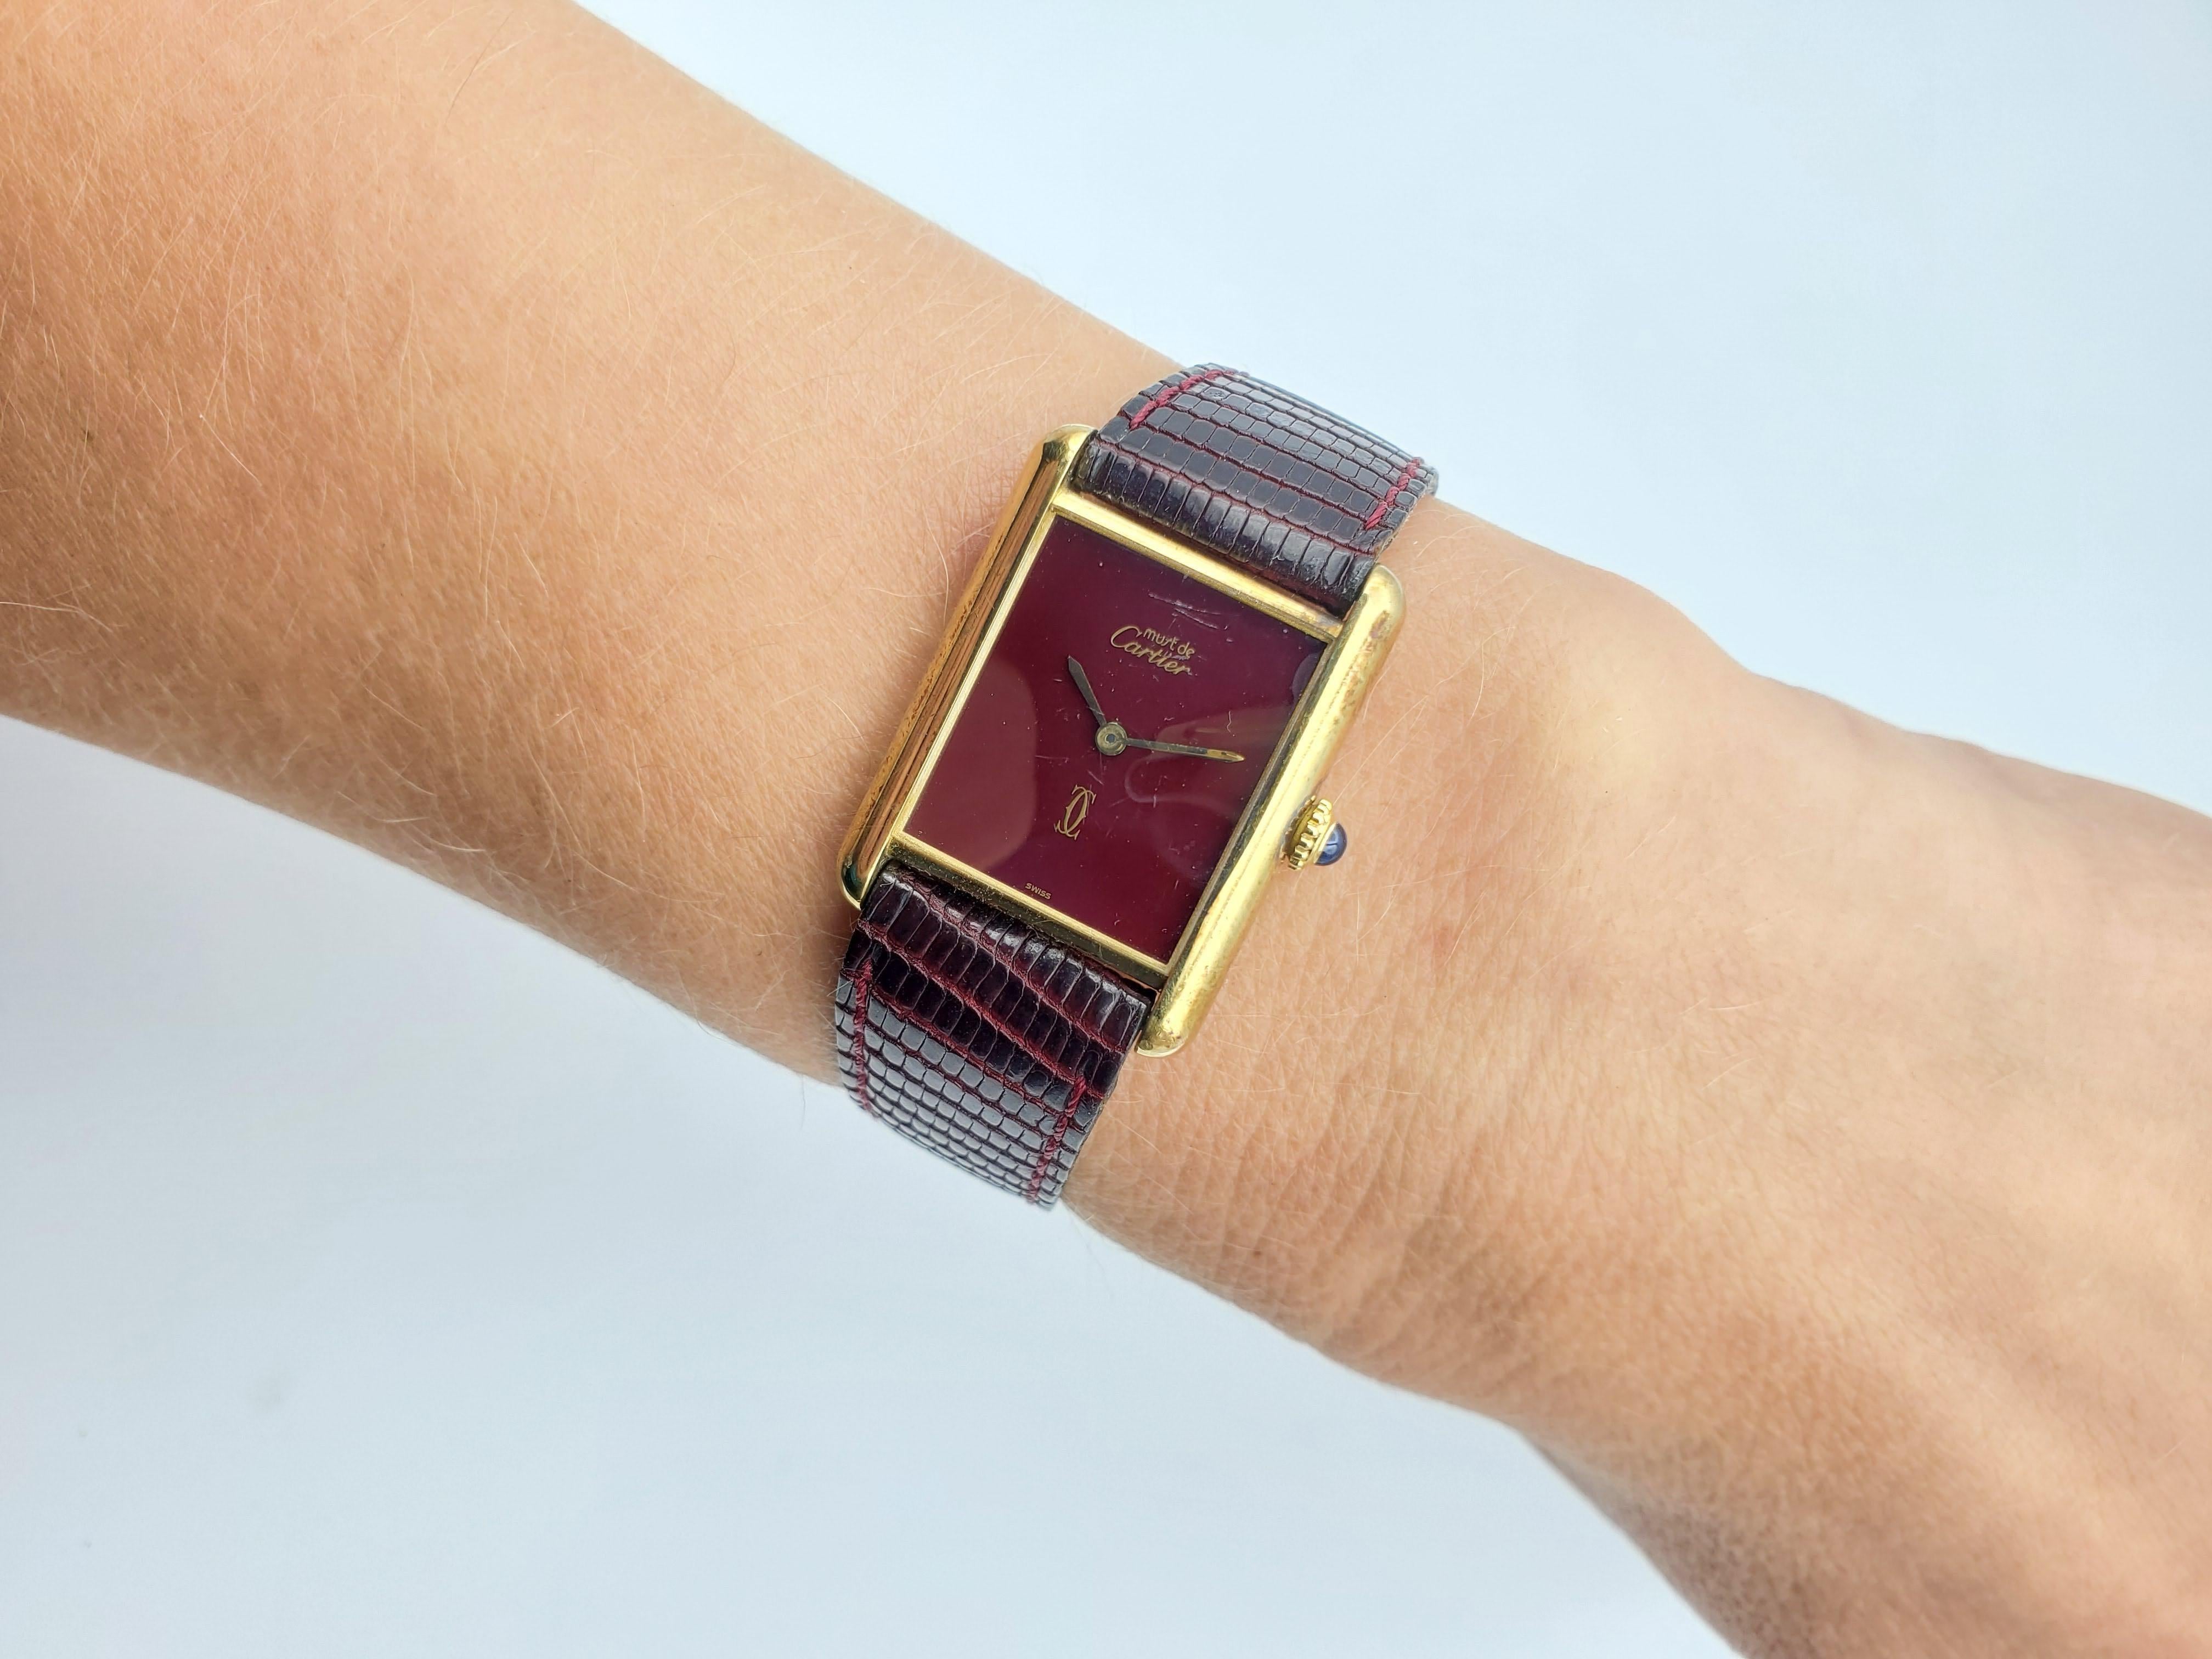 Cartier Must De Watch, Tank Vermeil. The watch has a burgundy/brown color. Estimated in the 1970s. The length is 8.5 inches total. Very minor scratch on crystal. The strap is aftermarket. The case is 23 x 23 mm and 6.4mm thick. Cabochon sapphire